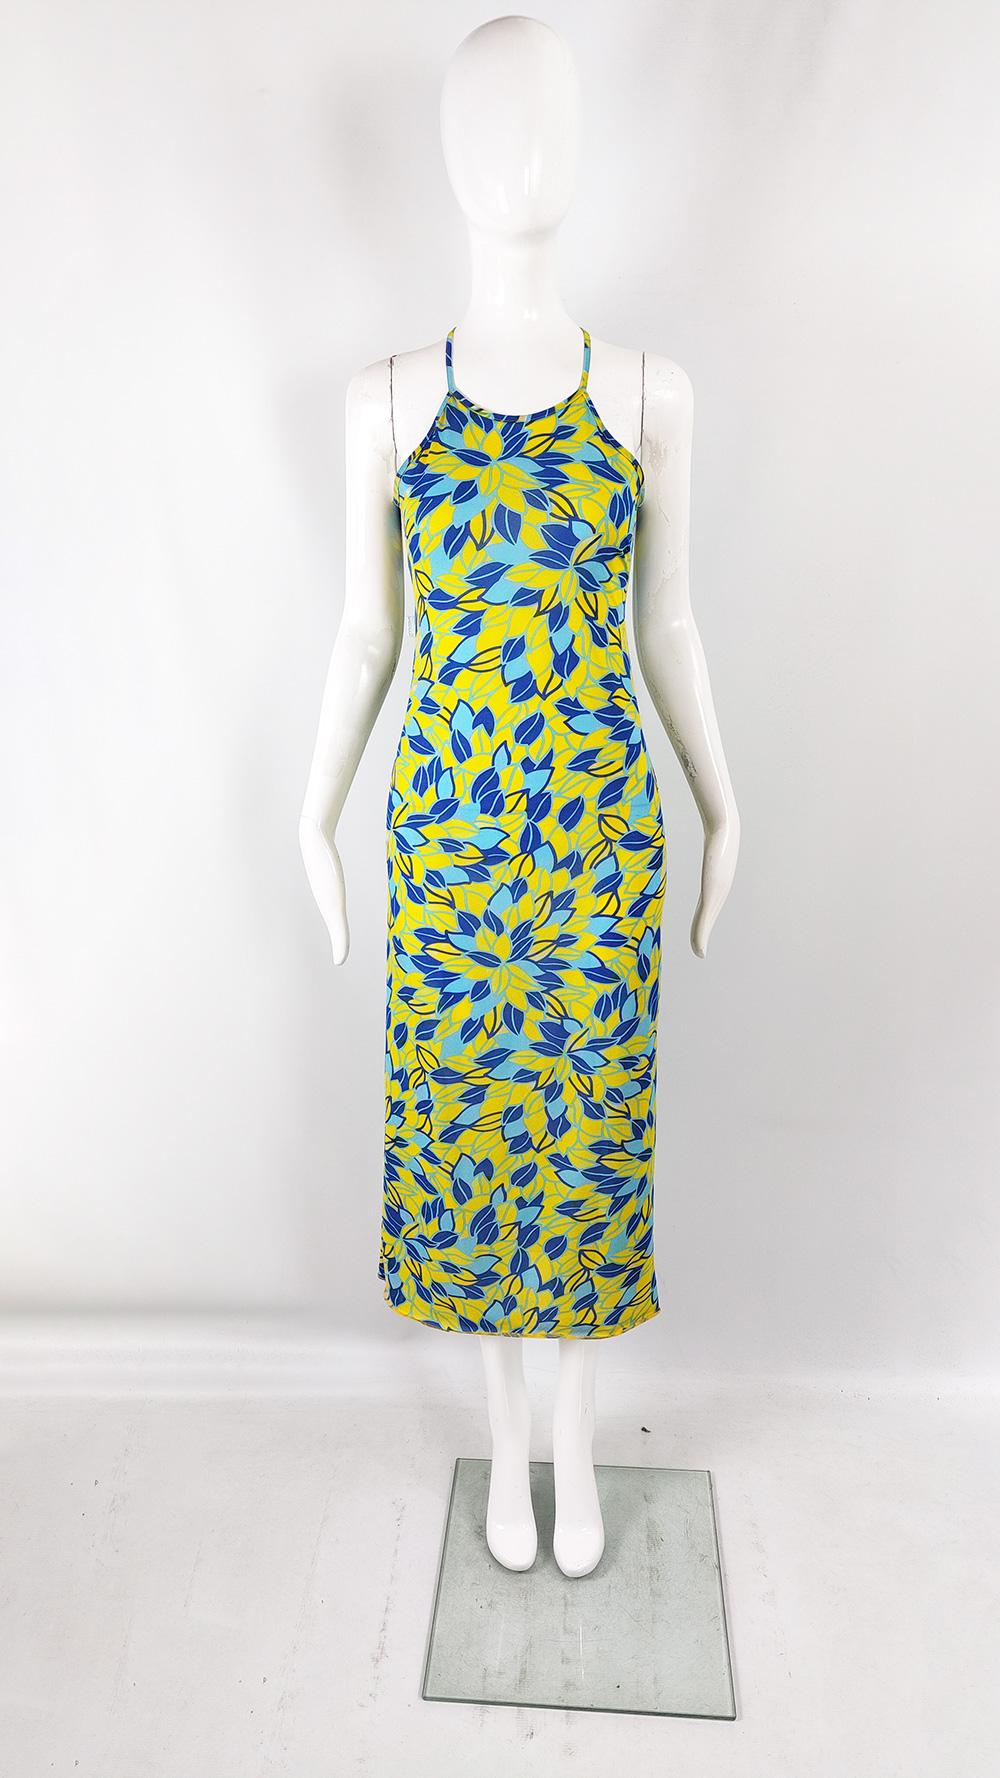 A fabulous and rare vintage womens dress from the 90s by luxury Italian fashion house, Fiorucci. In a lightweight crepe fabric with a beautifully vibrant yellow and blue leafy print. It has a halter neck that ties around the back of the neck above a